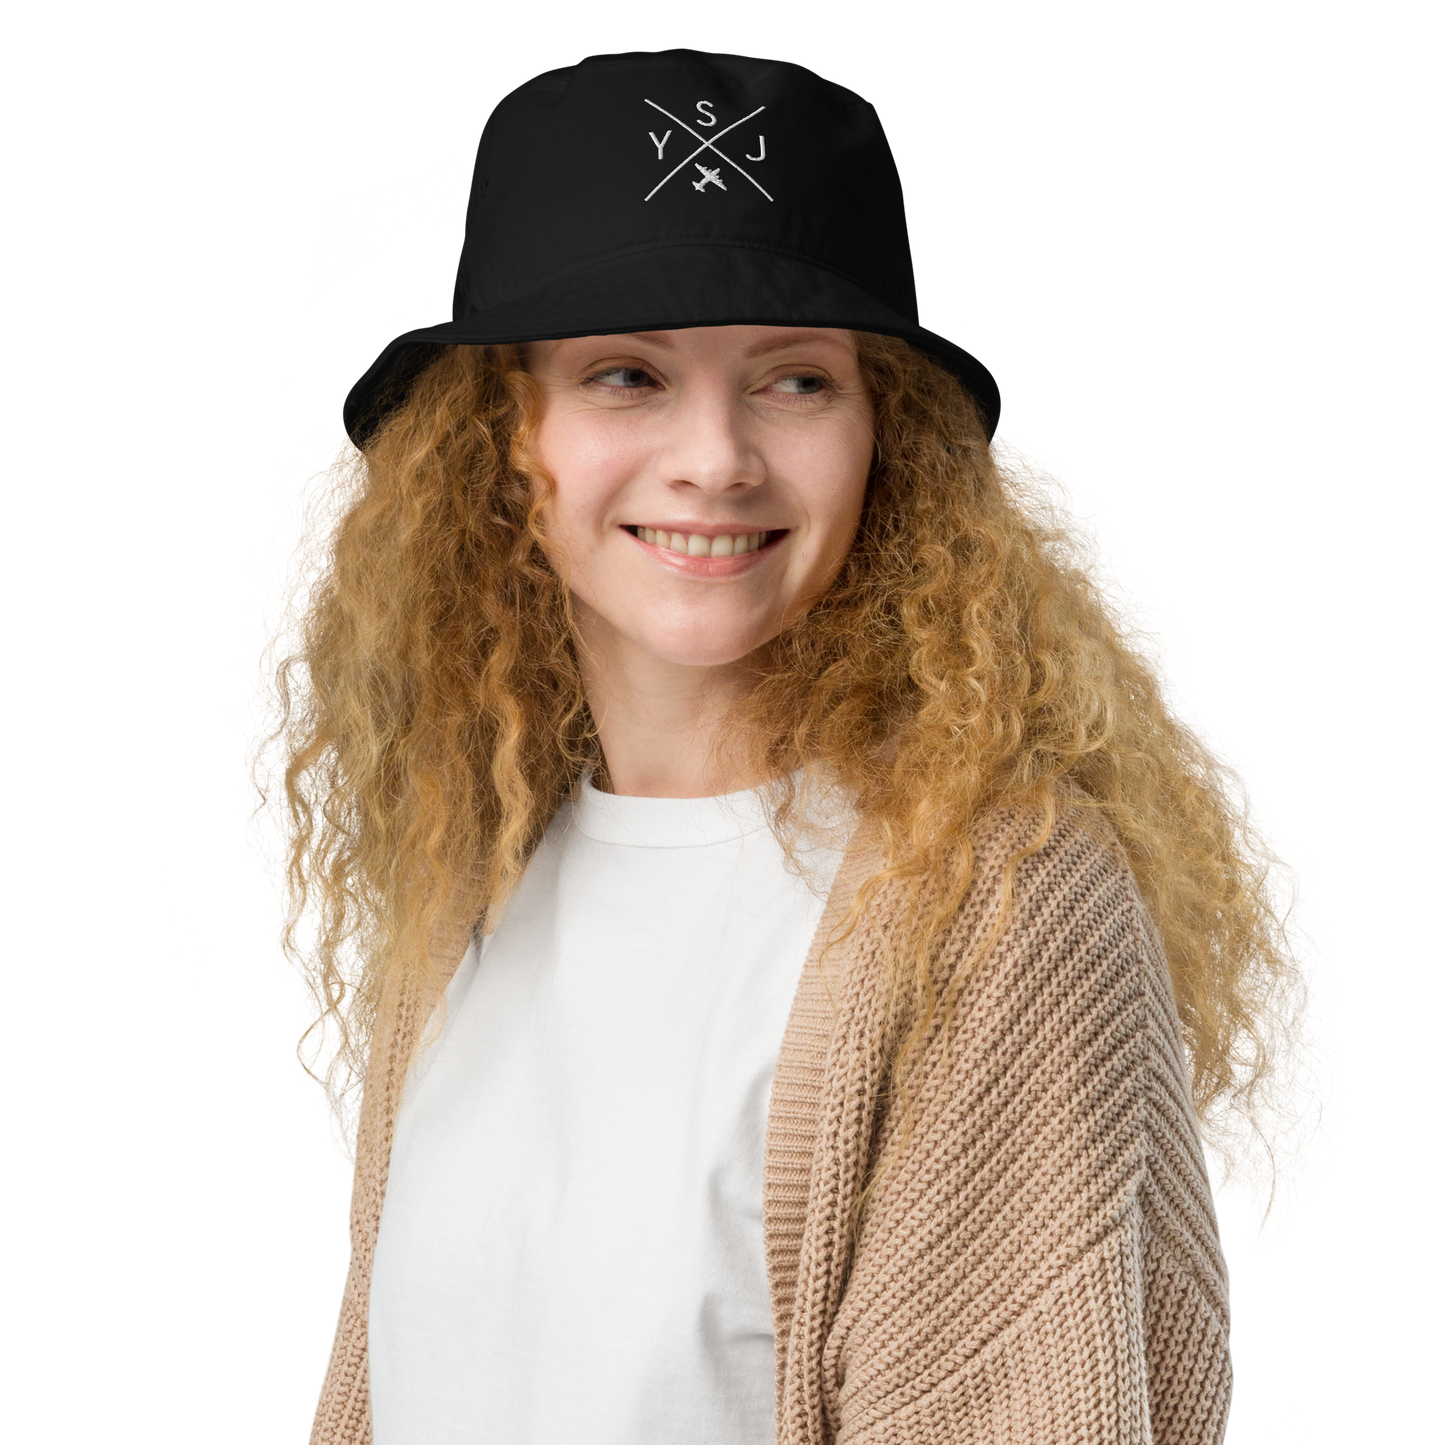 YHM Designs - YSJ Saint John Organic Cotton Bucket Hat - Crossed-X Design with Airport Code and Vintage Propliner - White Embroidery - Image 04